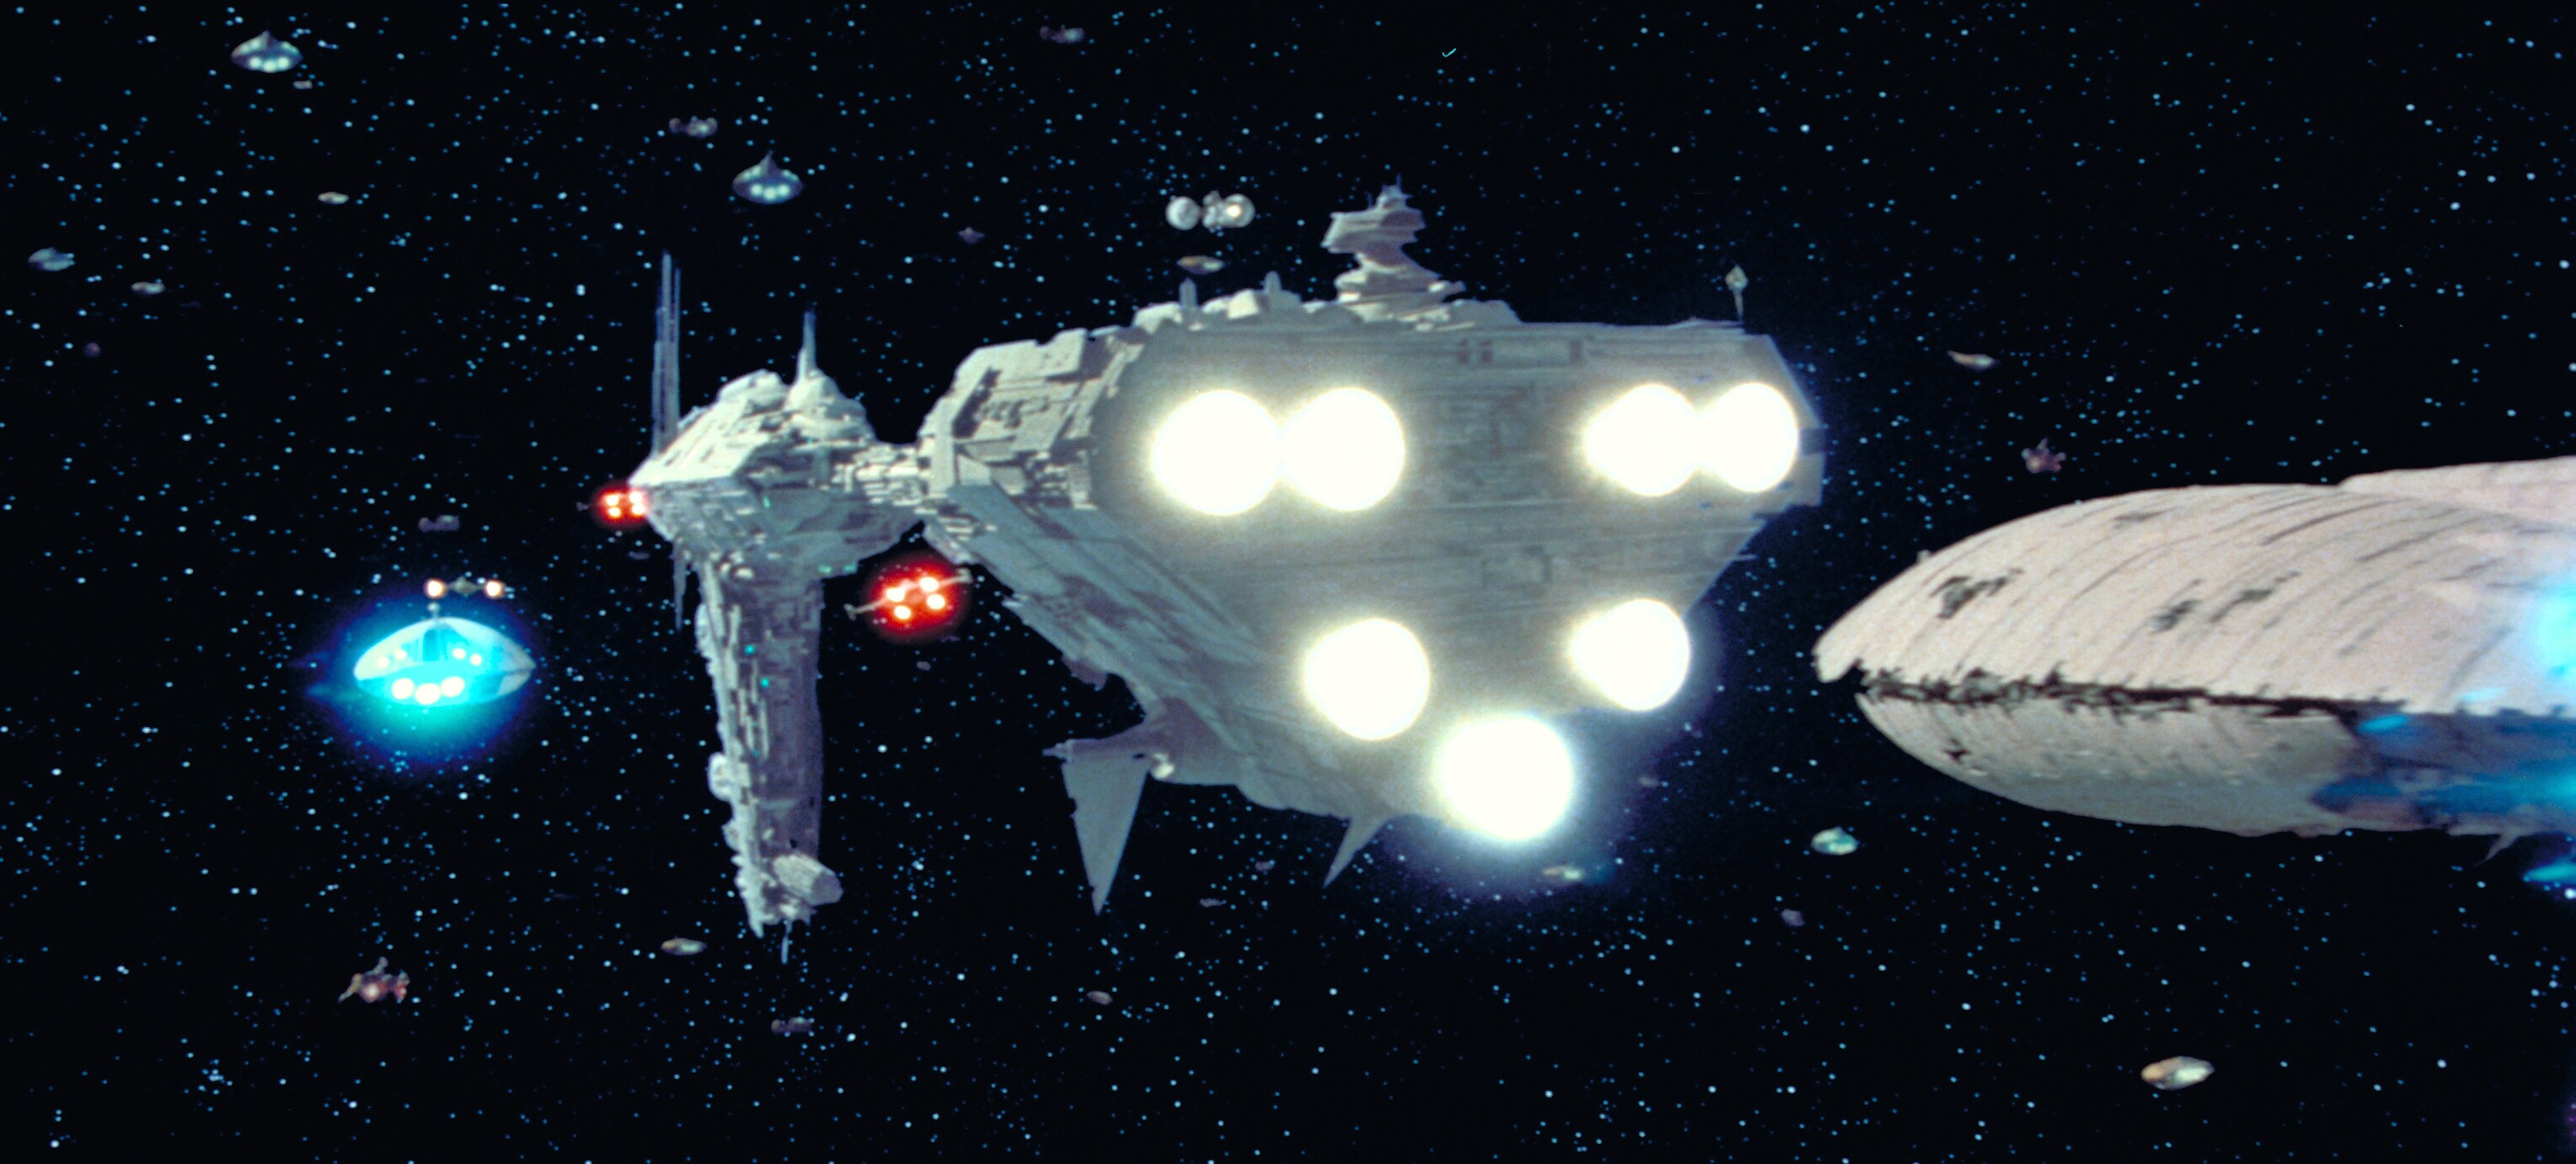 The rebel units that did escape gathered in deep space, moving in convoys in hopes of evading the...